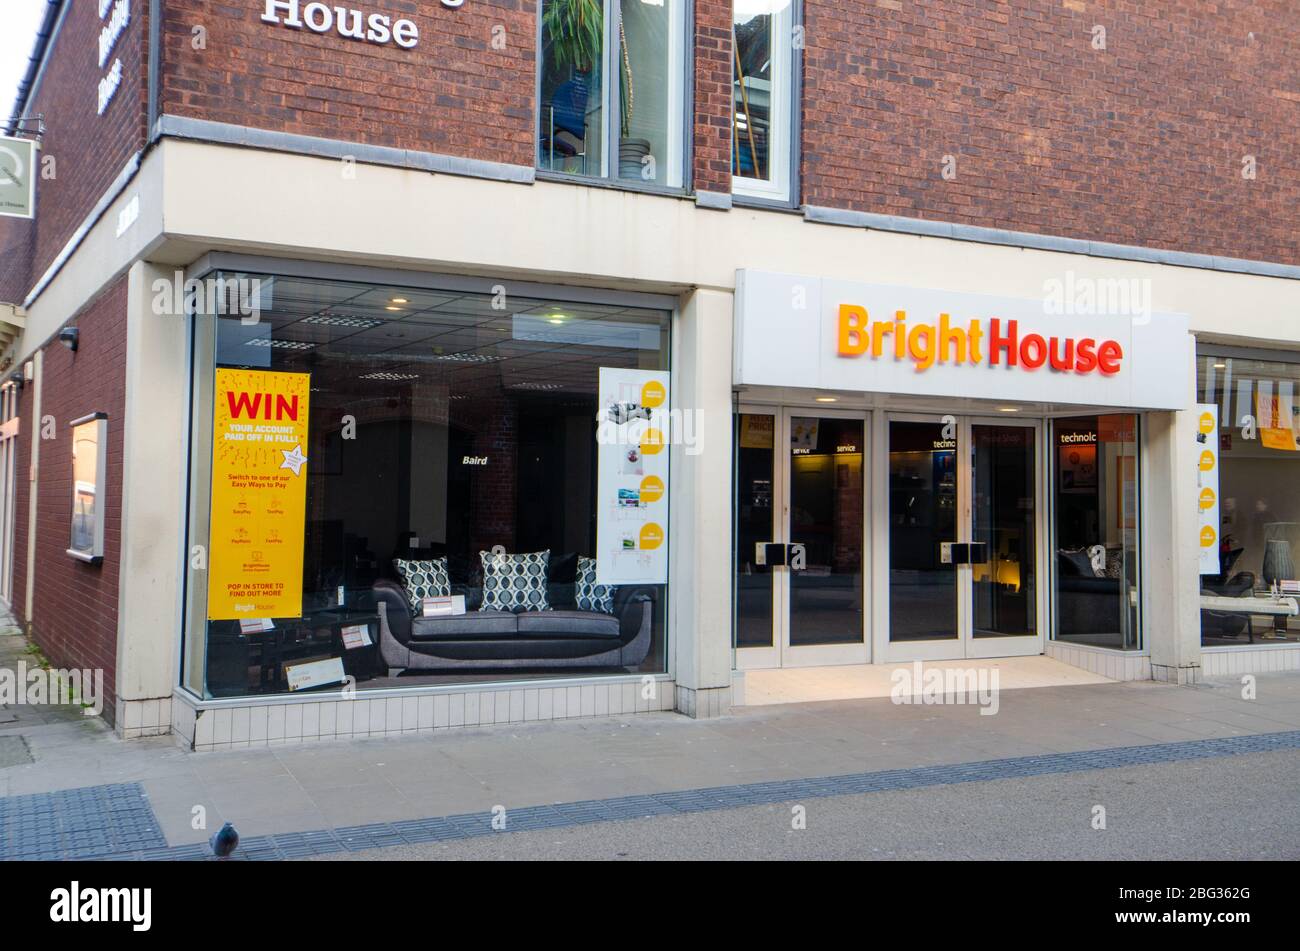 Chester, UK: Mar 1, 2020: A poster promotes a competition to win your account paid off in full at the BrightHouse store on Frodsham Street. Stock Photo